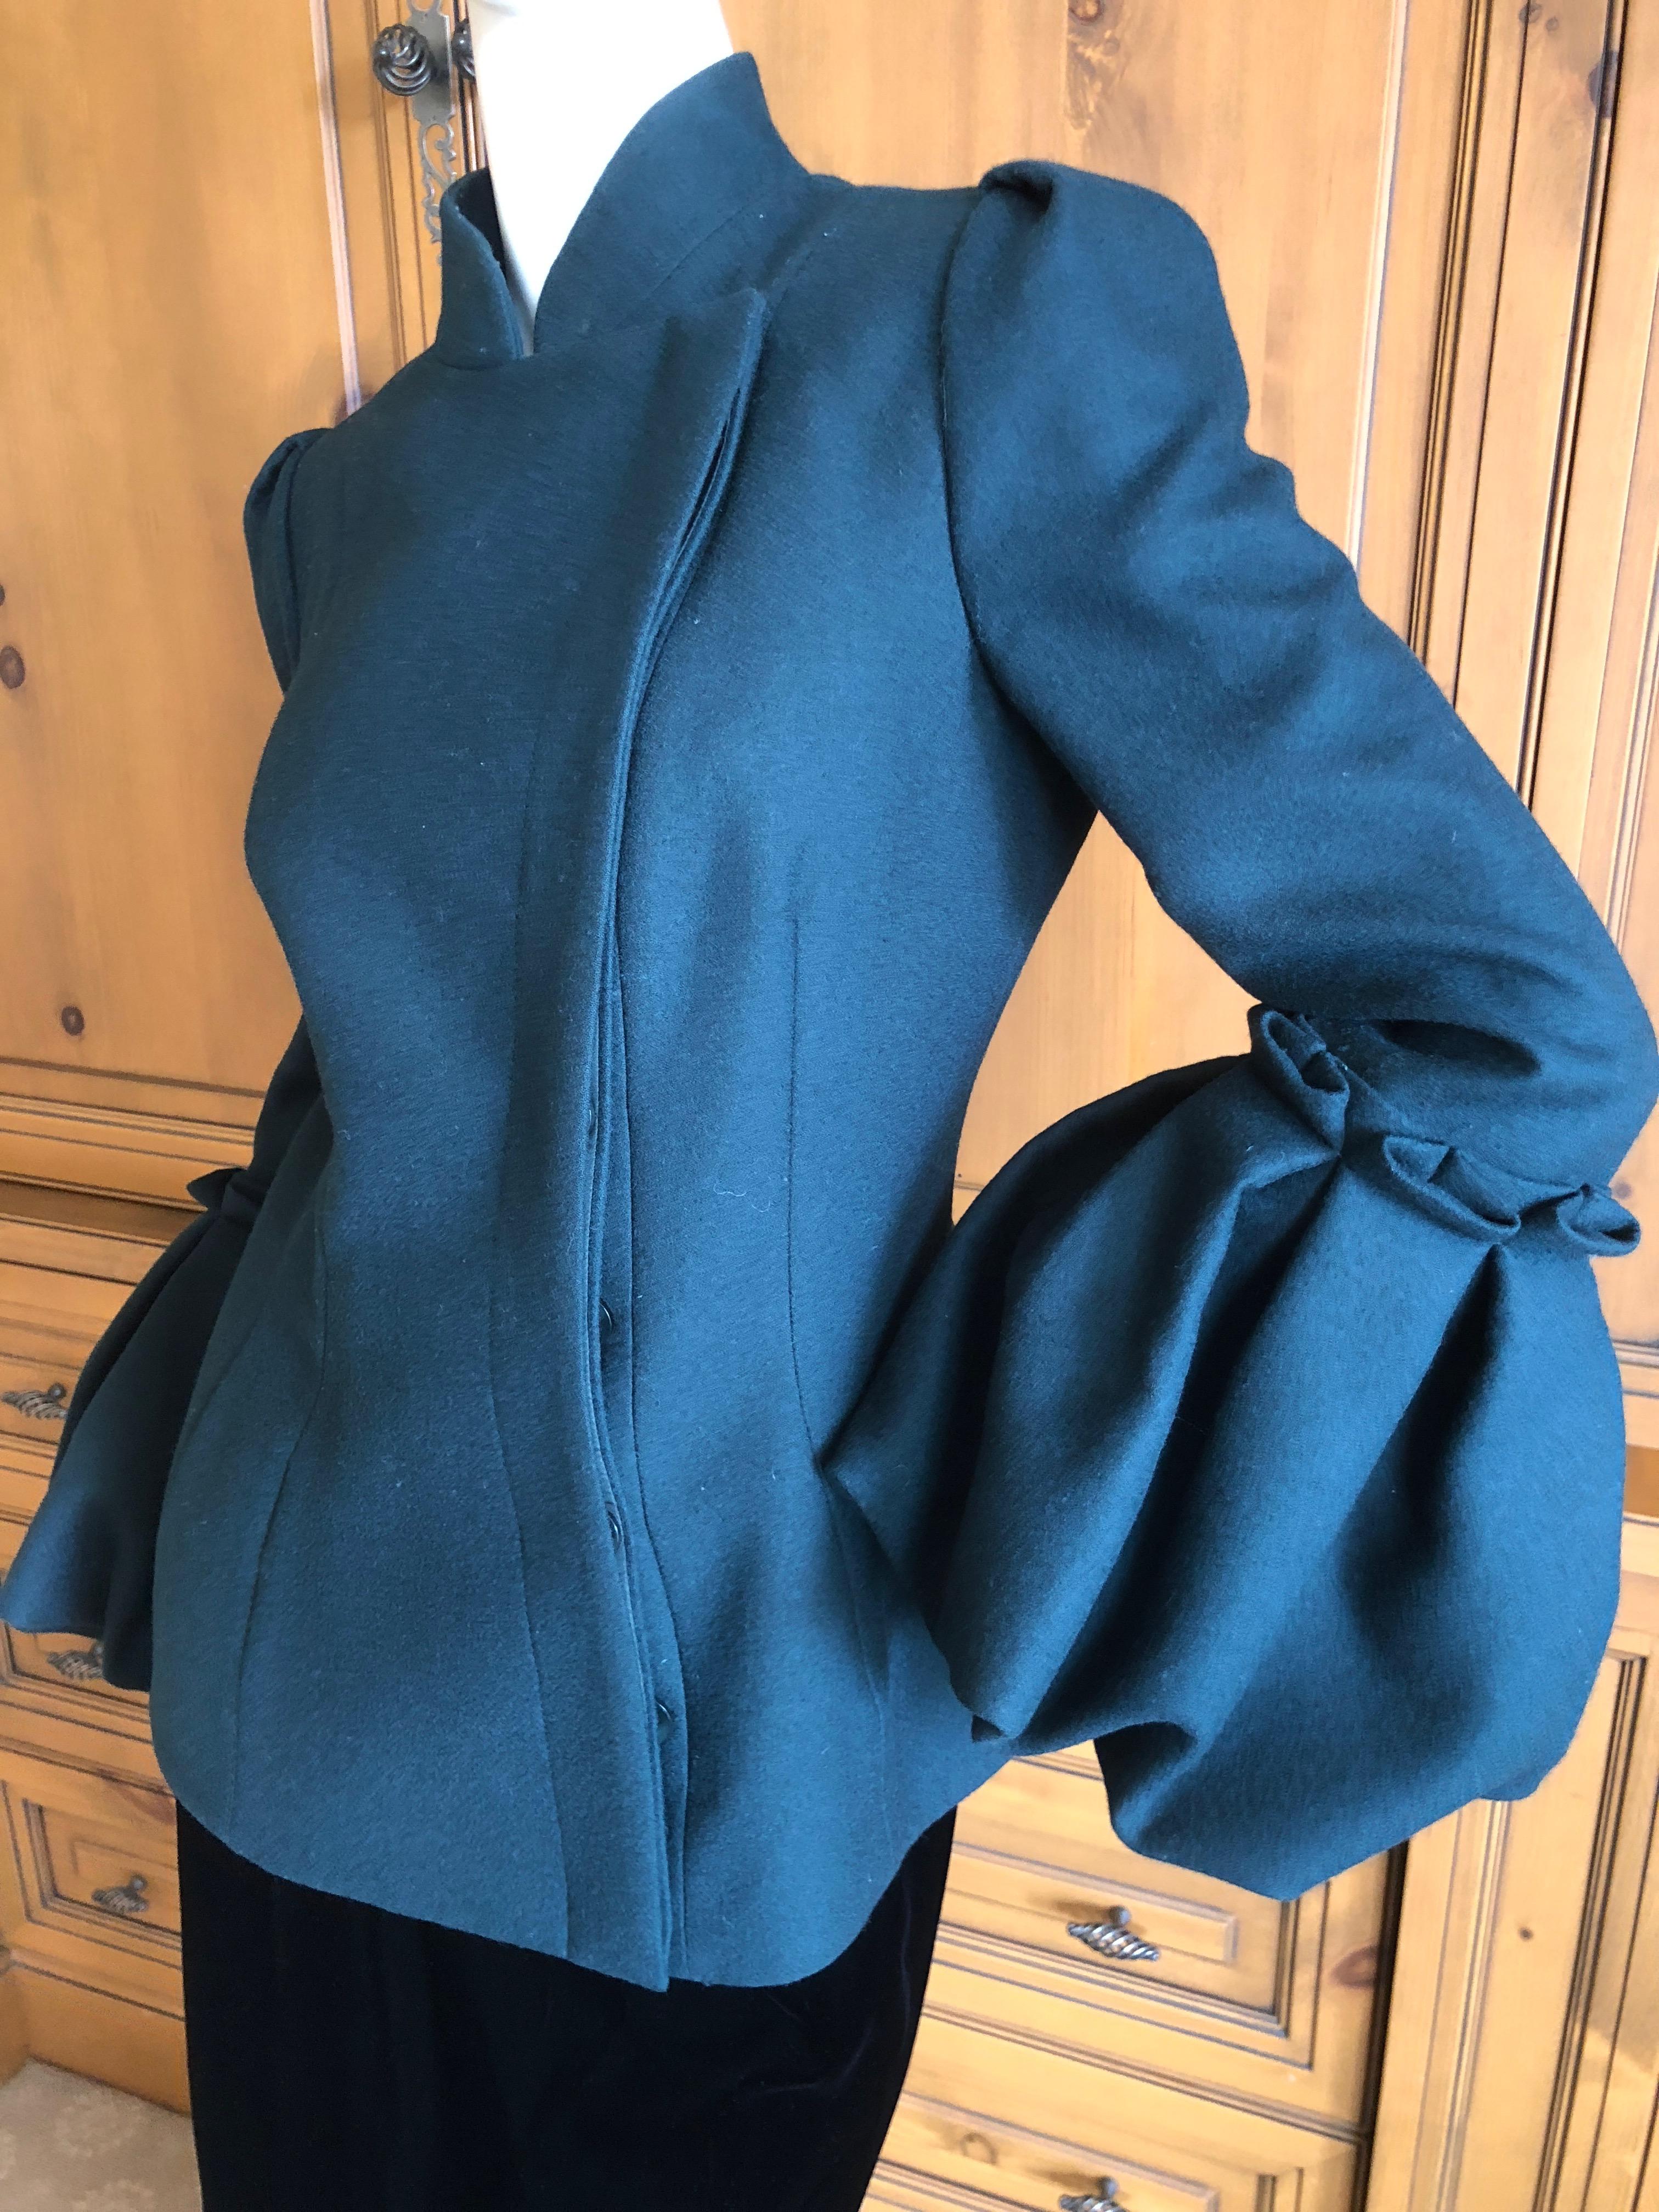 Alexander McQueen Teal Green Wool Jacket with Exaggerated Cuffs Size 42 For Sale 2